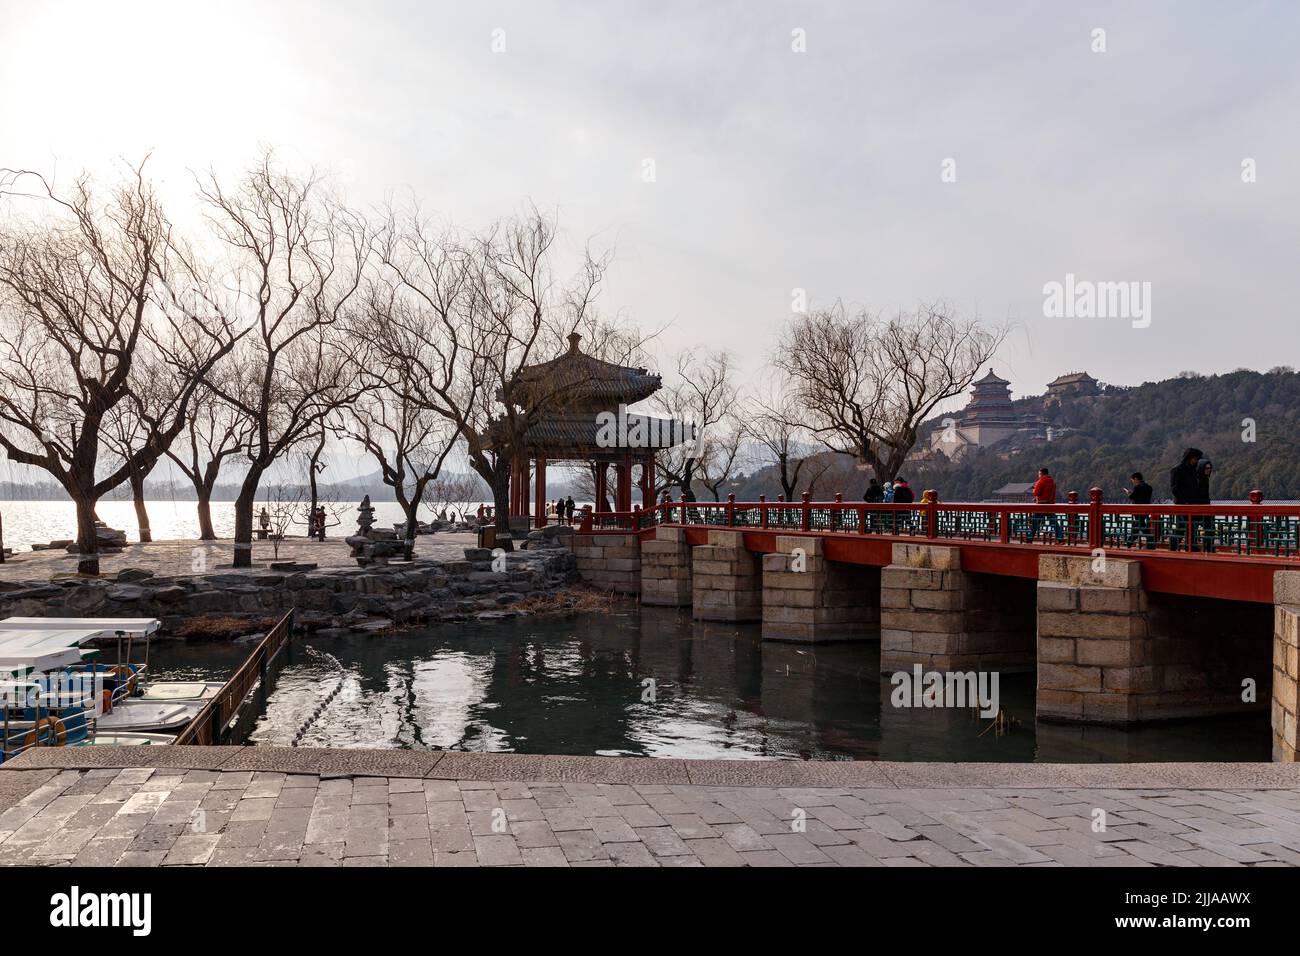 By the lake at the Summer Palace in Beijing, China in March 2018. Stock Photo